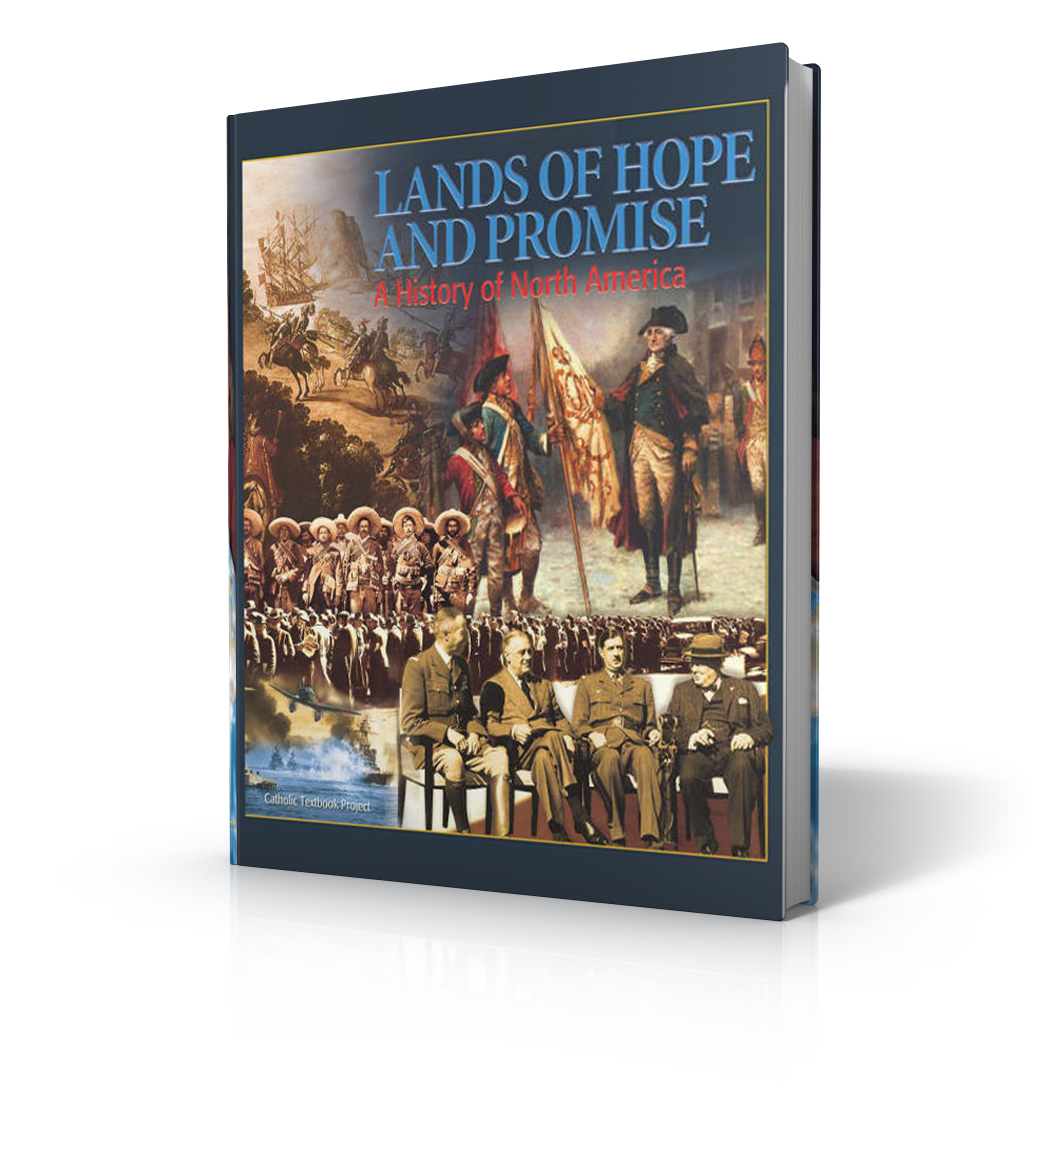 Lands of Hope and Promise: A History of North America (Textbook)